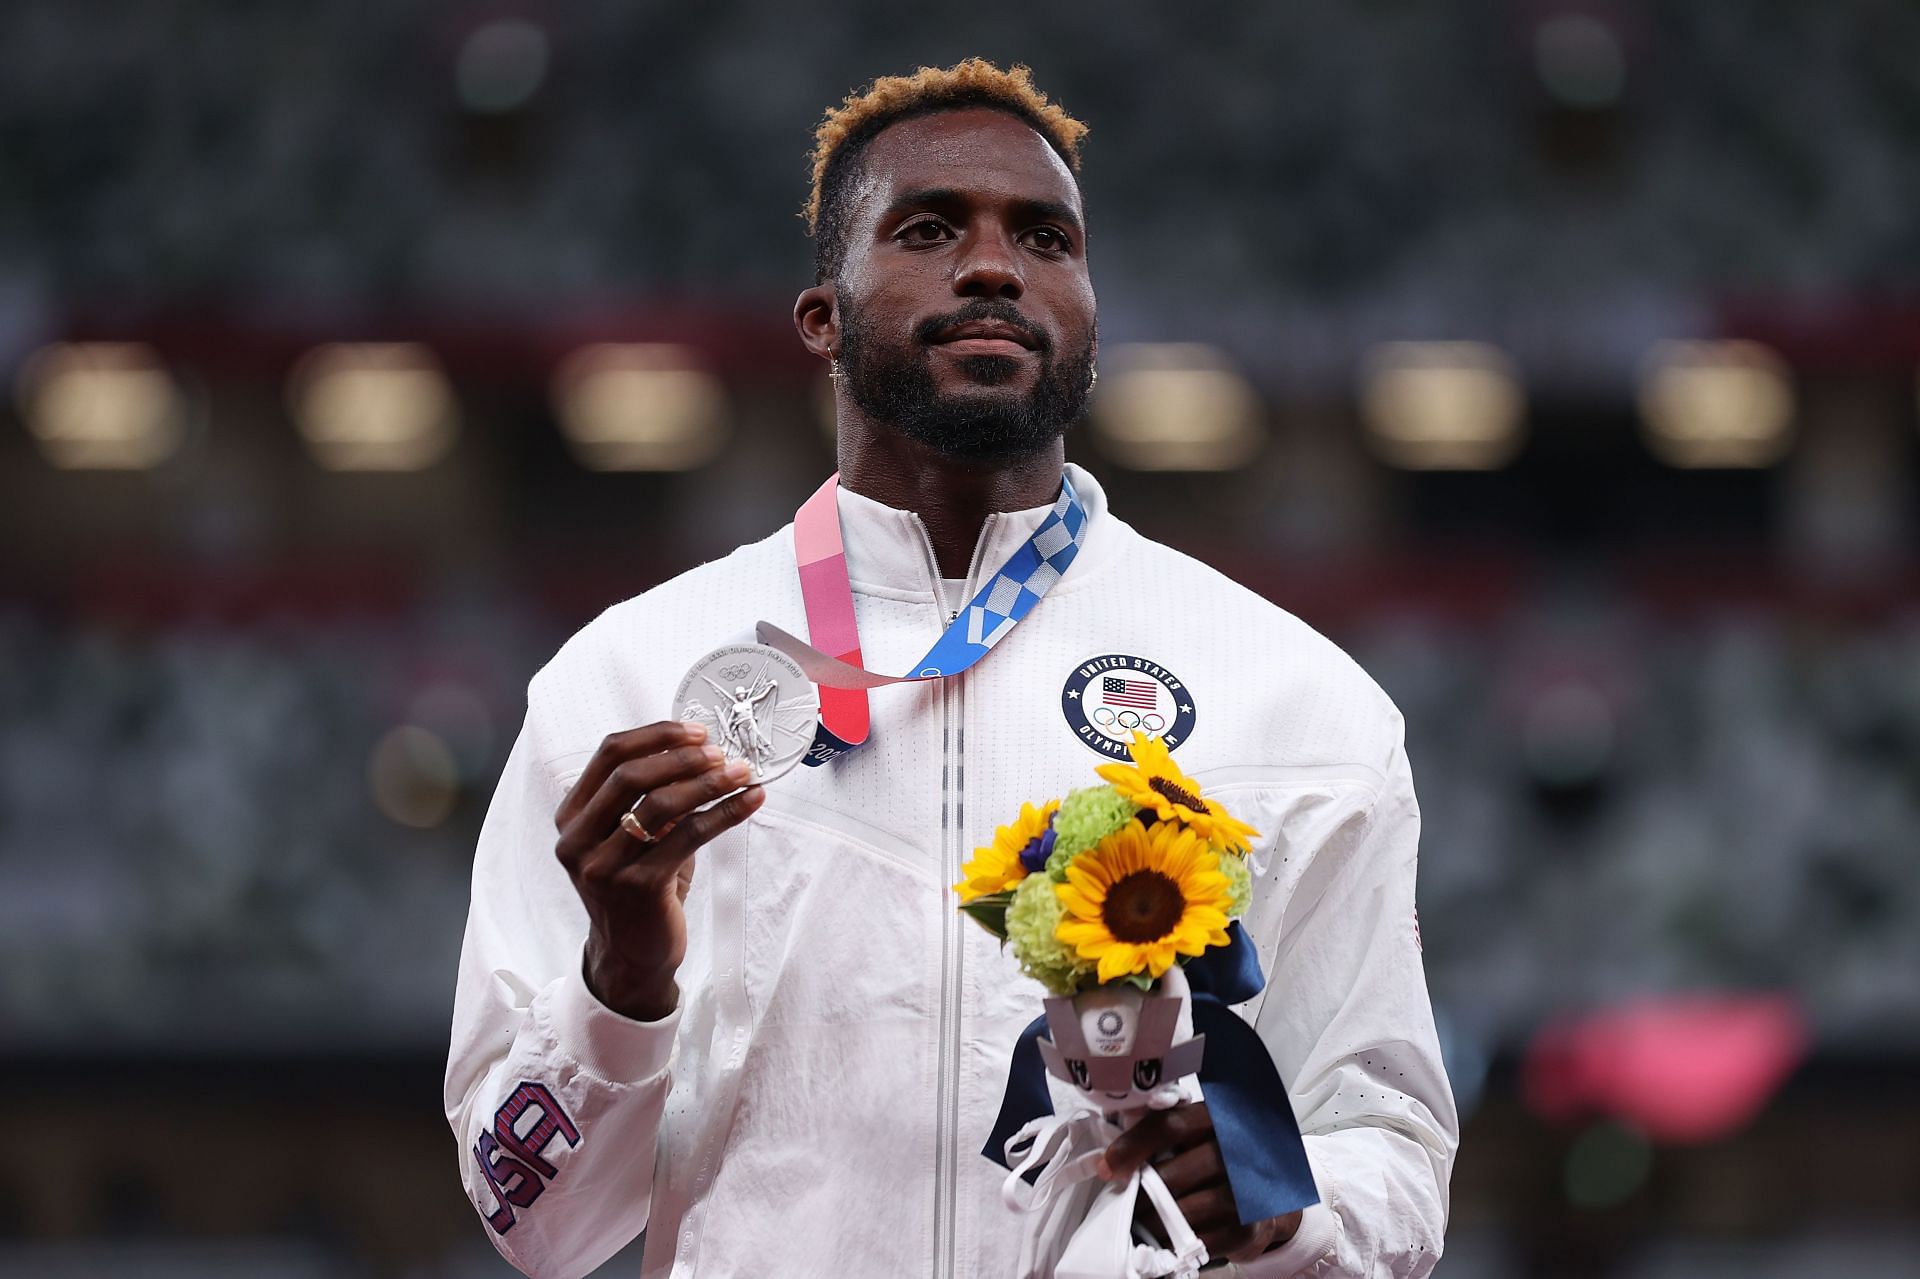 Silver medalist Kenneth Bednarek holds up his medal on the podium during the medal ceremony for the Men&#039;s 200m at the 2020 Olympic Games in Tokyo, Japan.